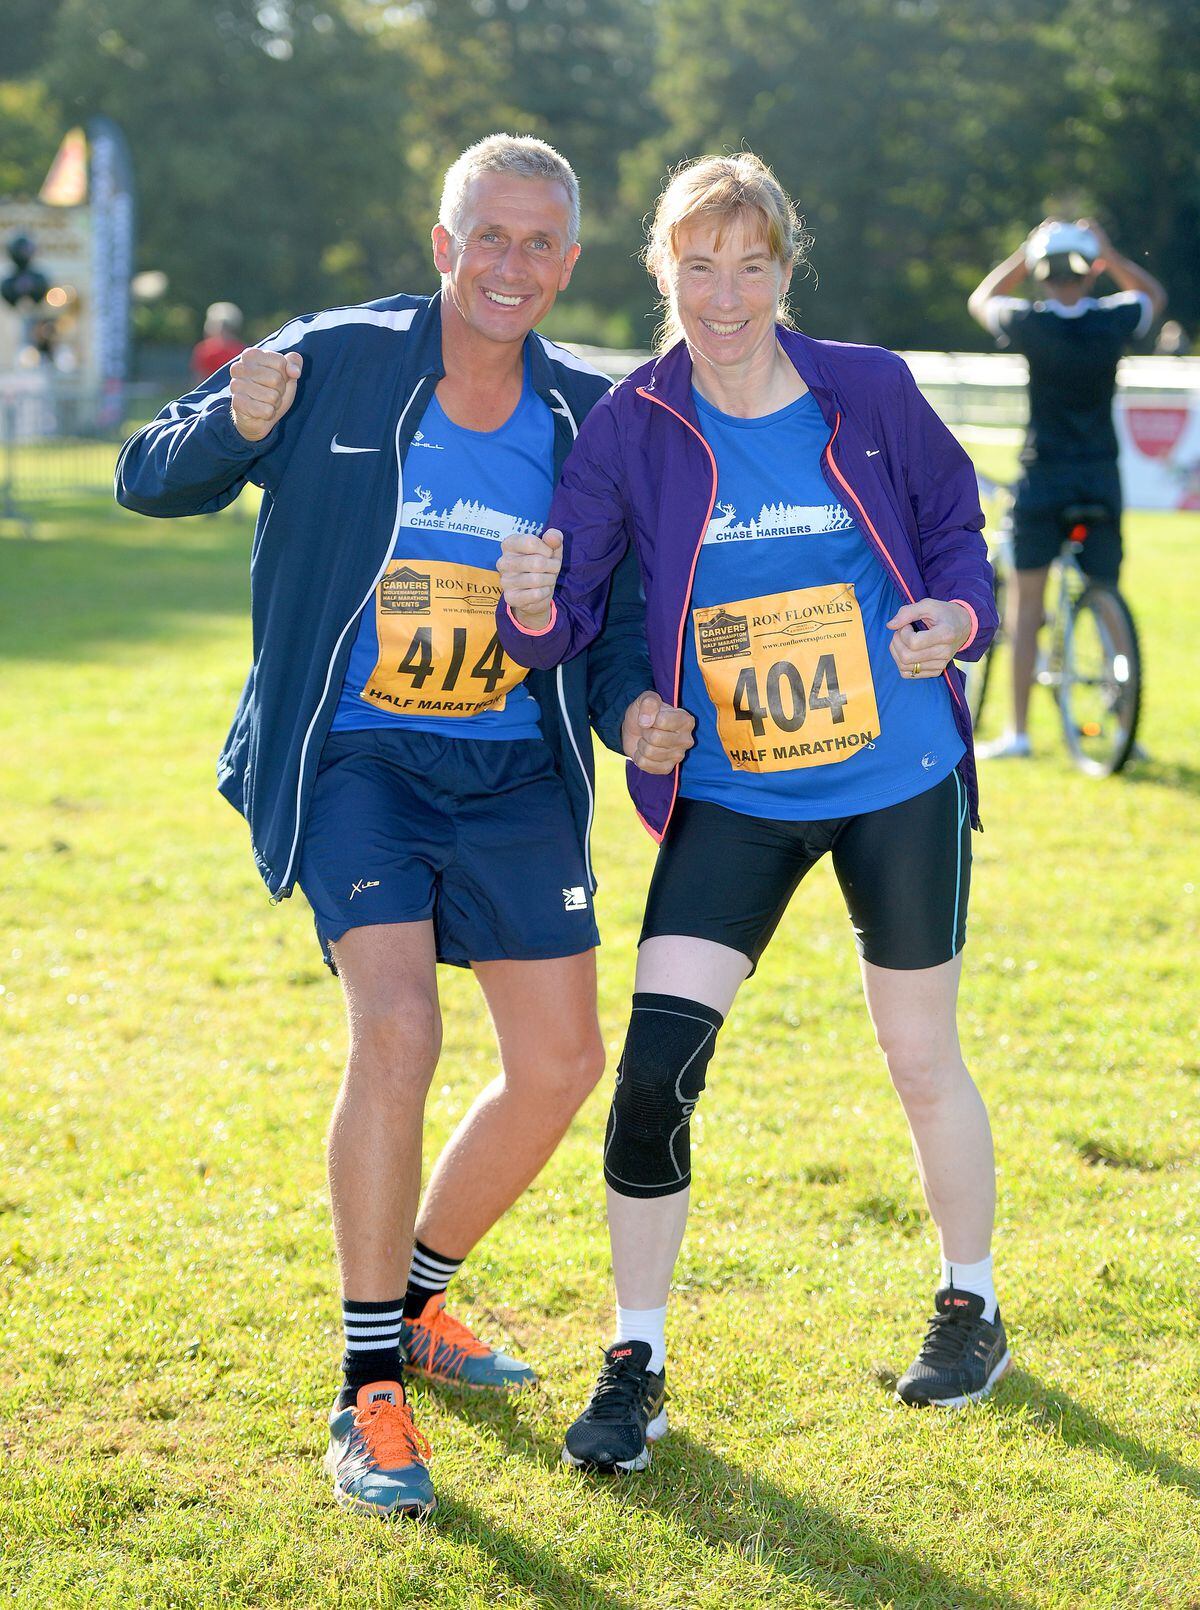 Tim Elsmere and Yvonne Cooper from Chase Harriers